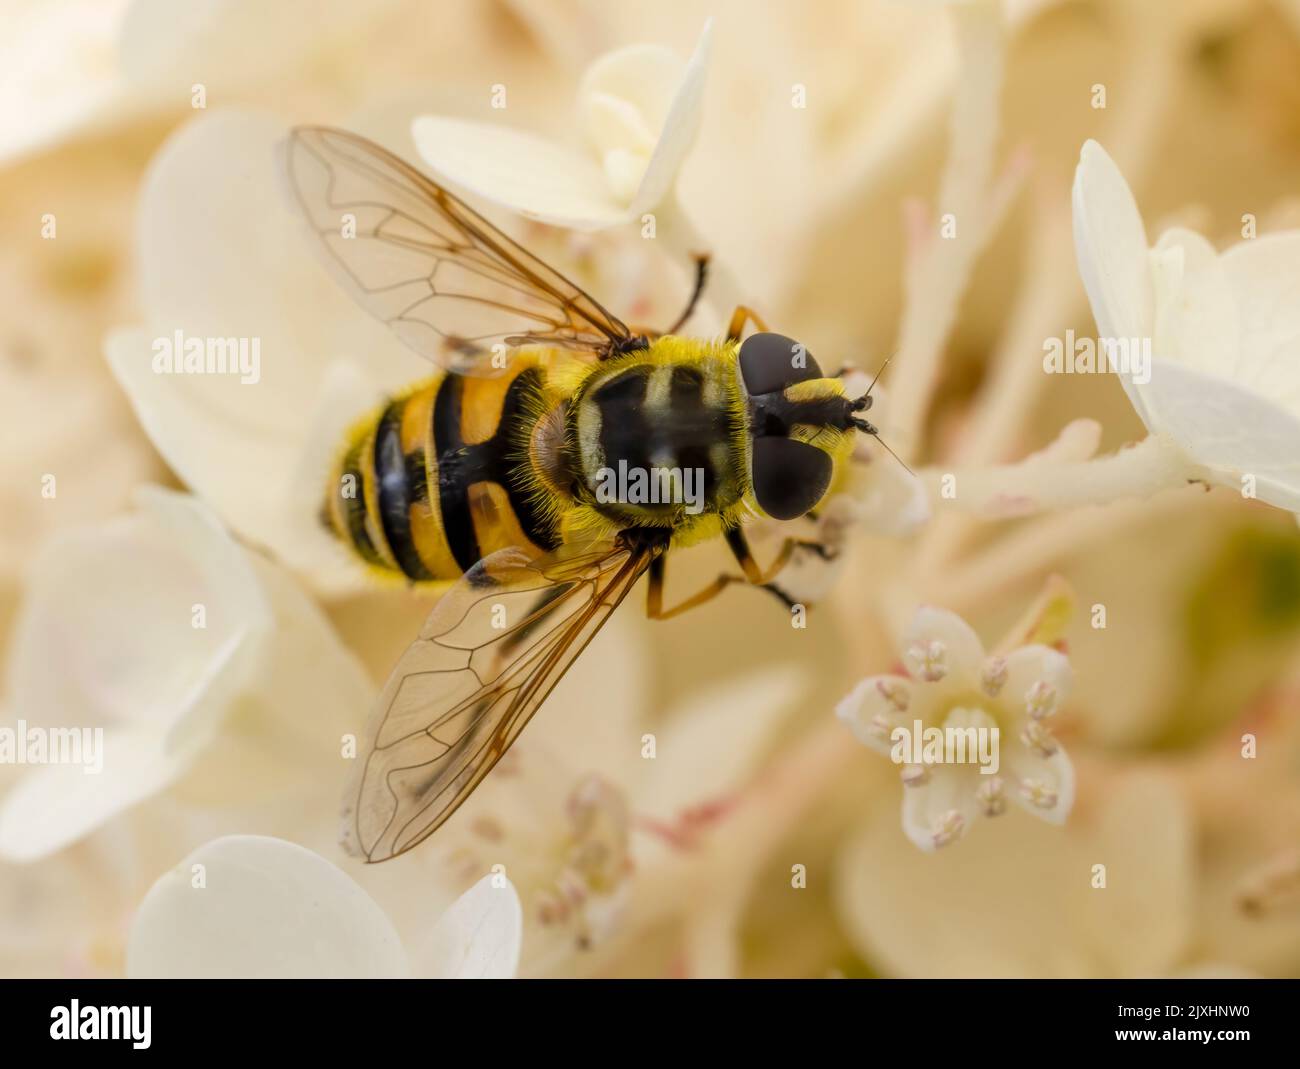 A black and yellow hover fly, on a white Hydrangea flower Stock Photo